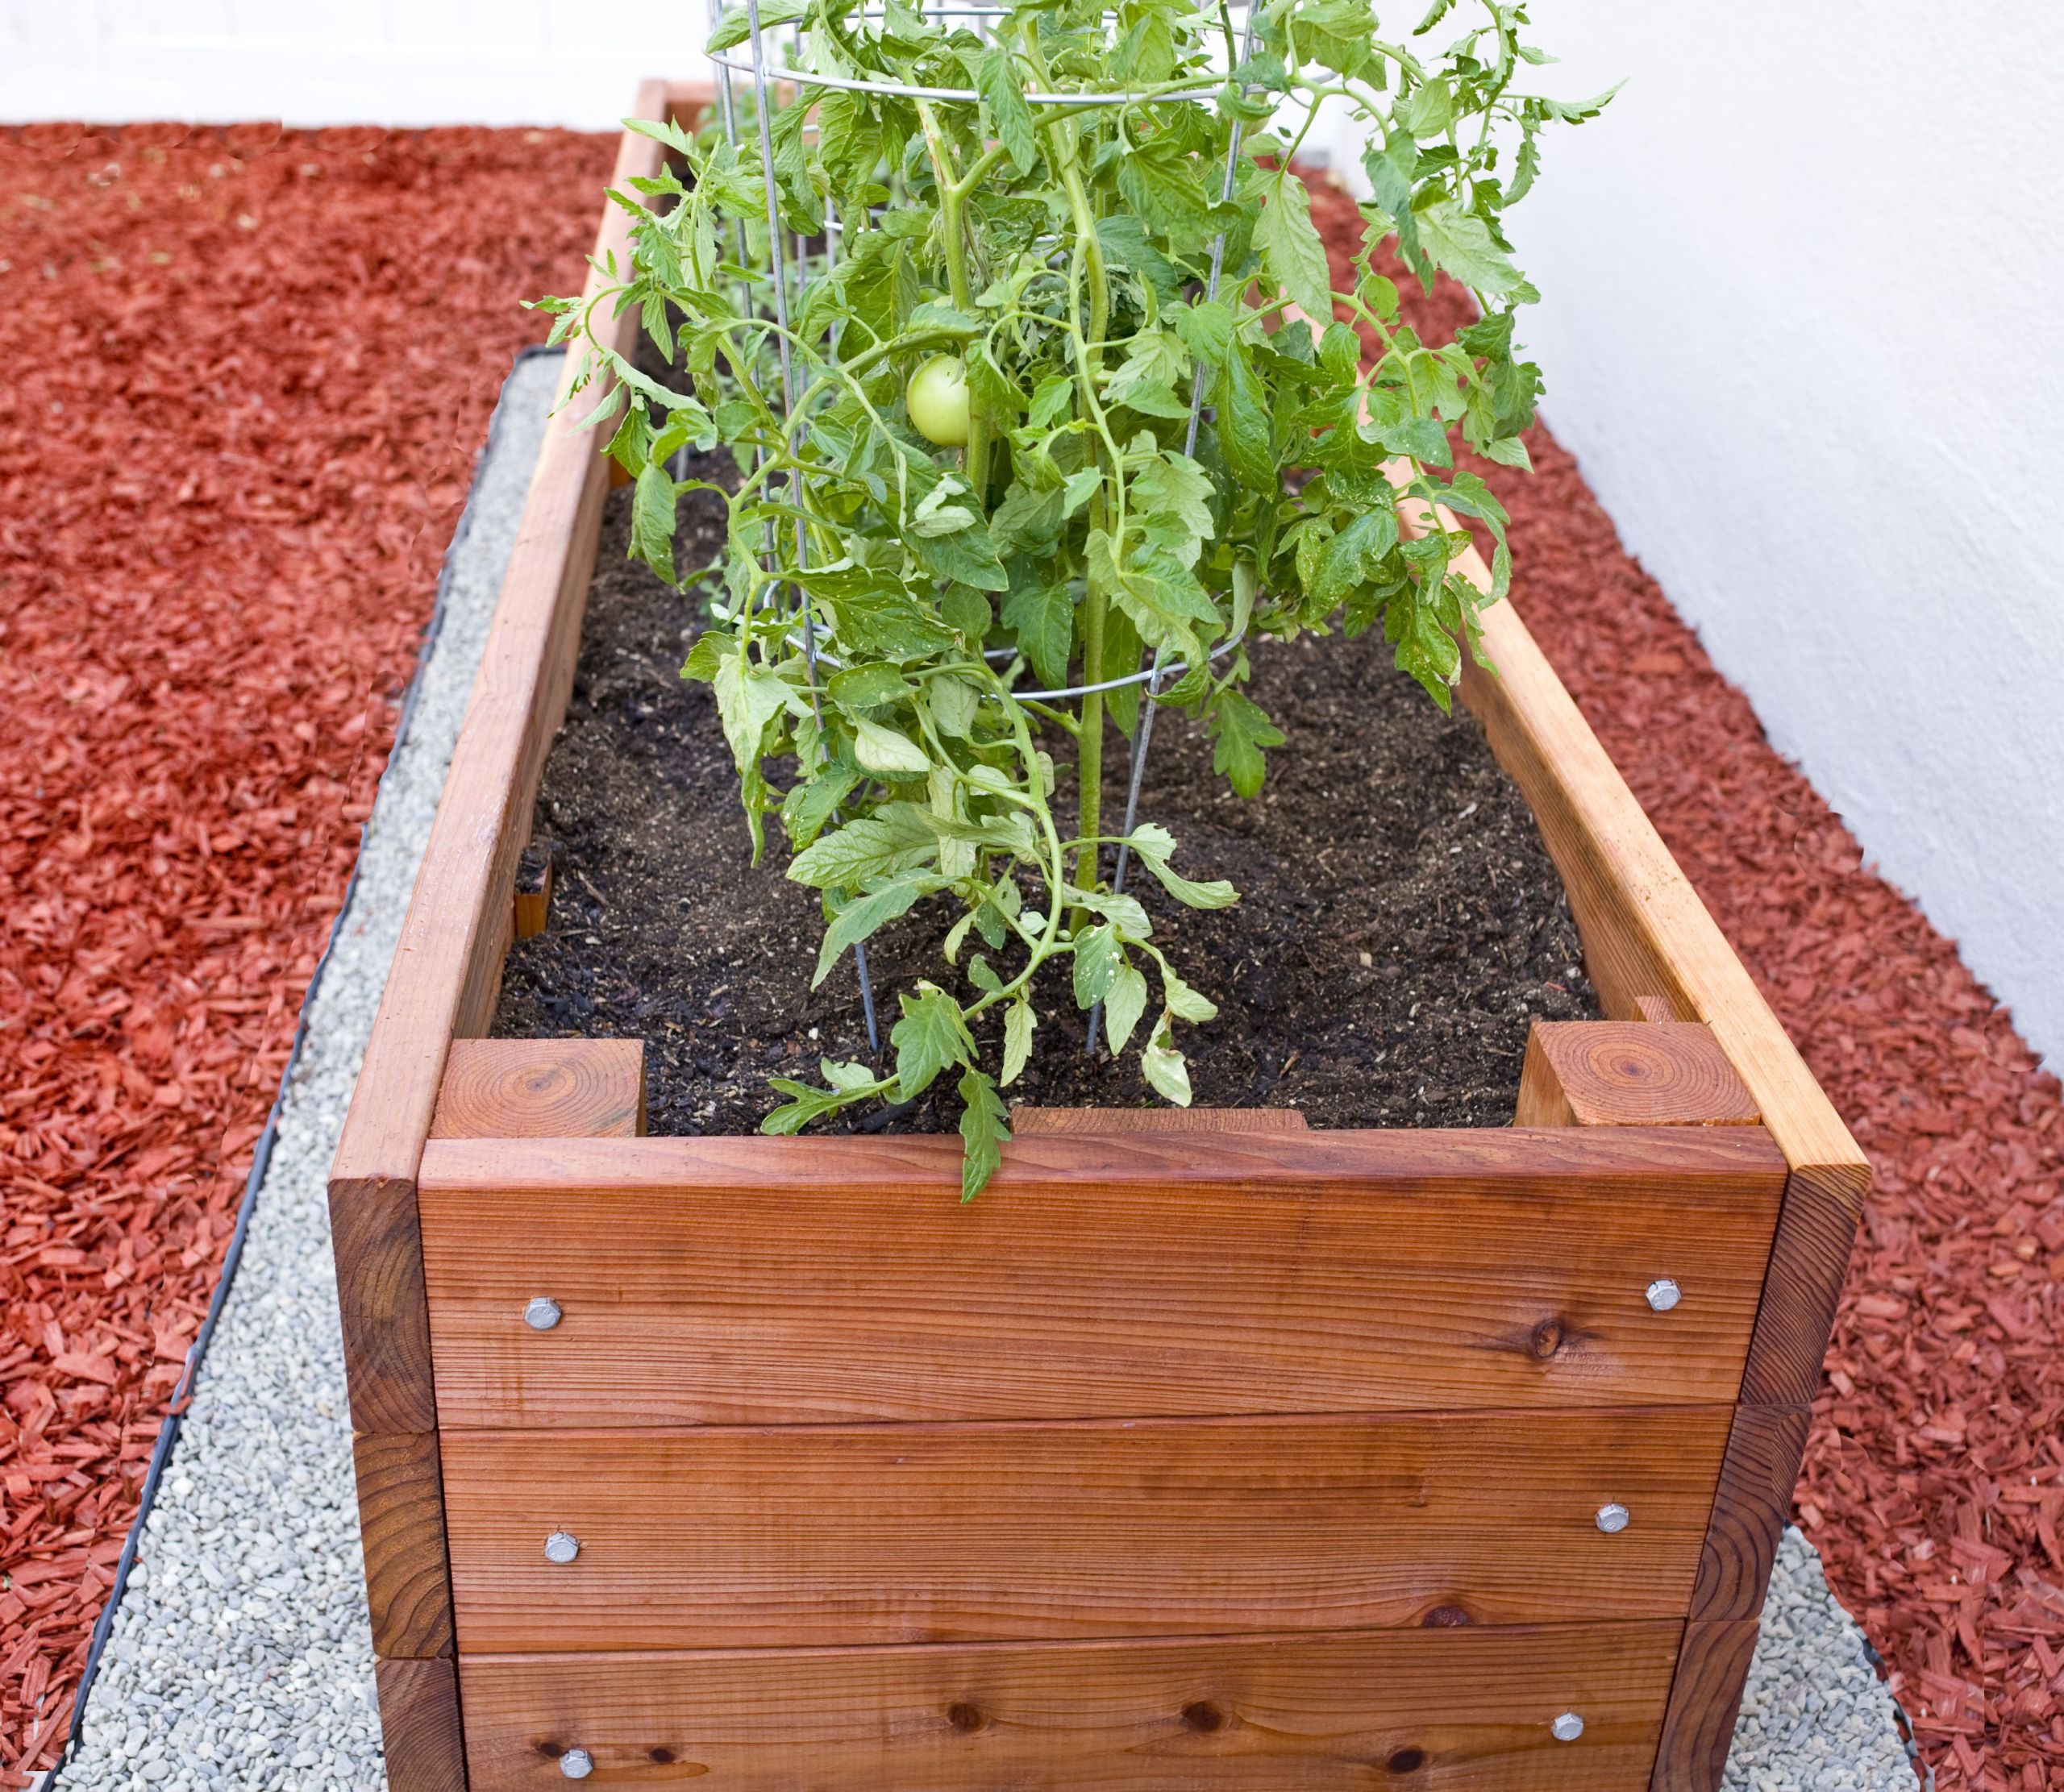 DIY Tomato Planter Box
 Redwood Planter Box for Tomatoes With images